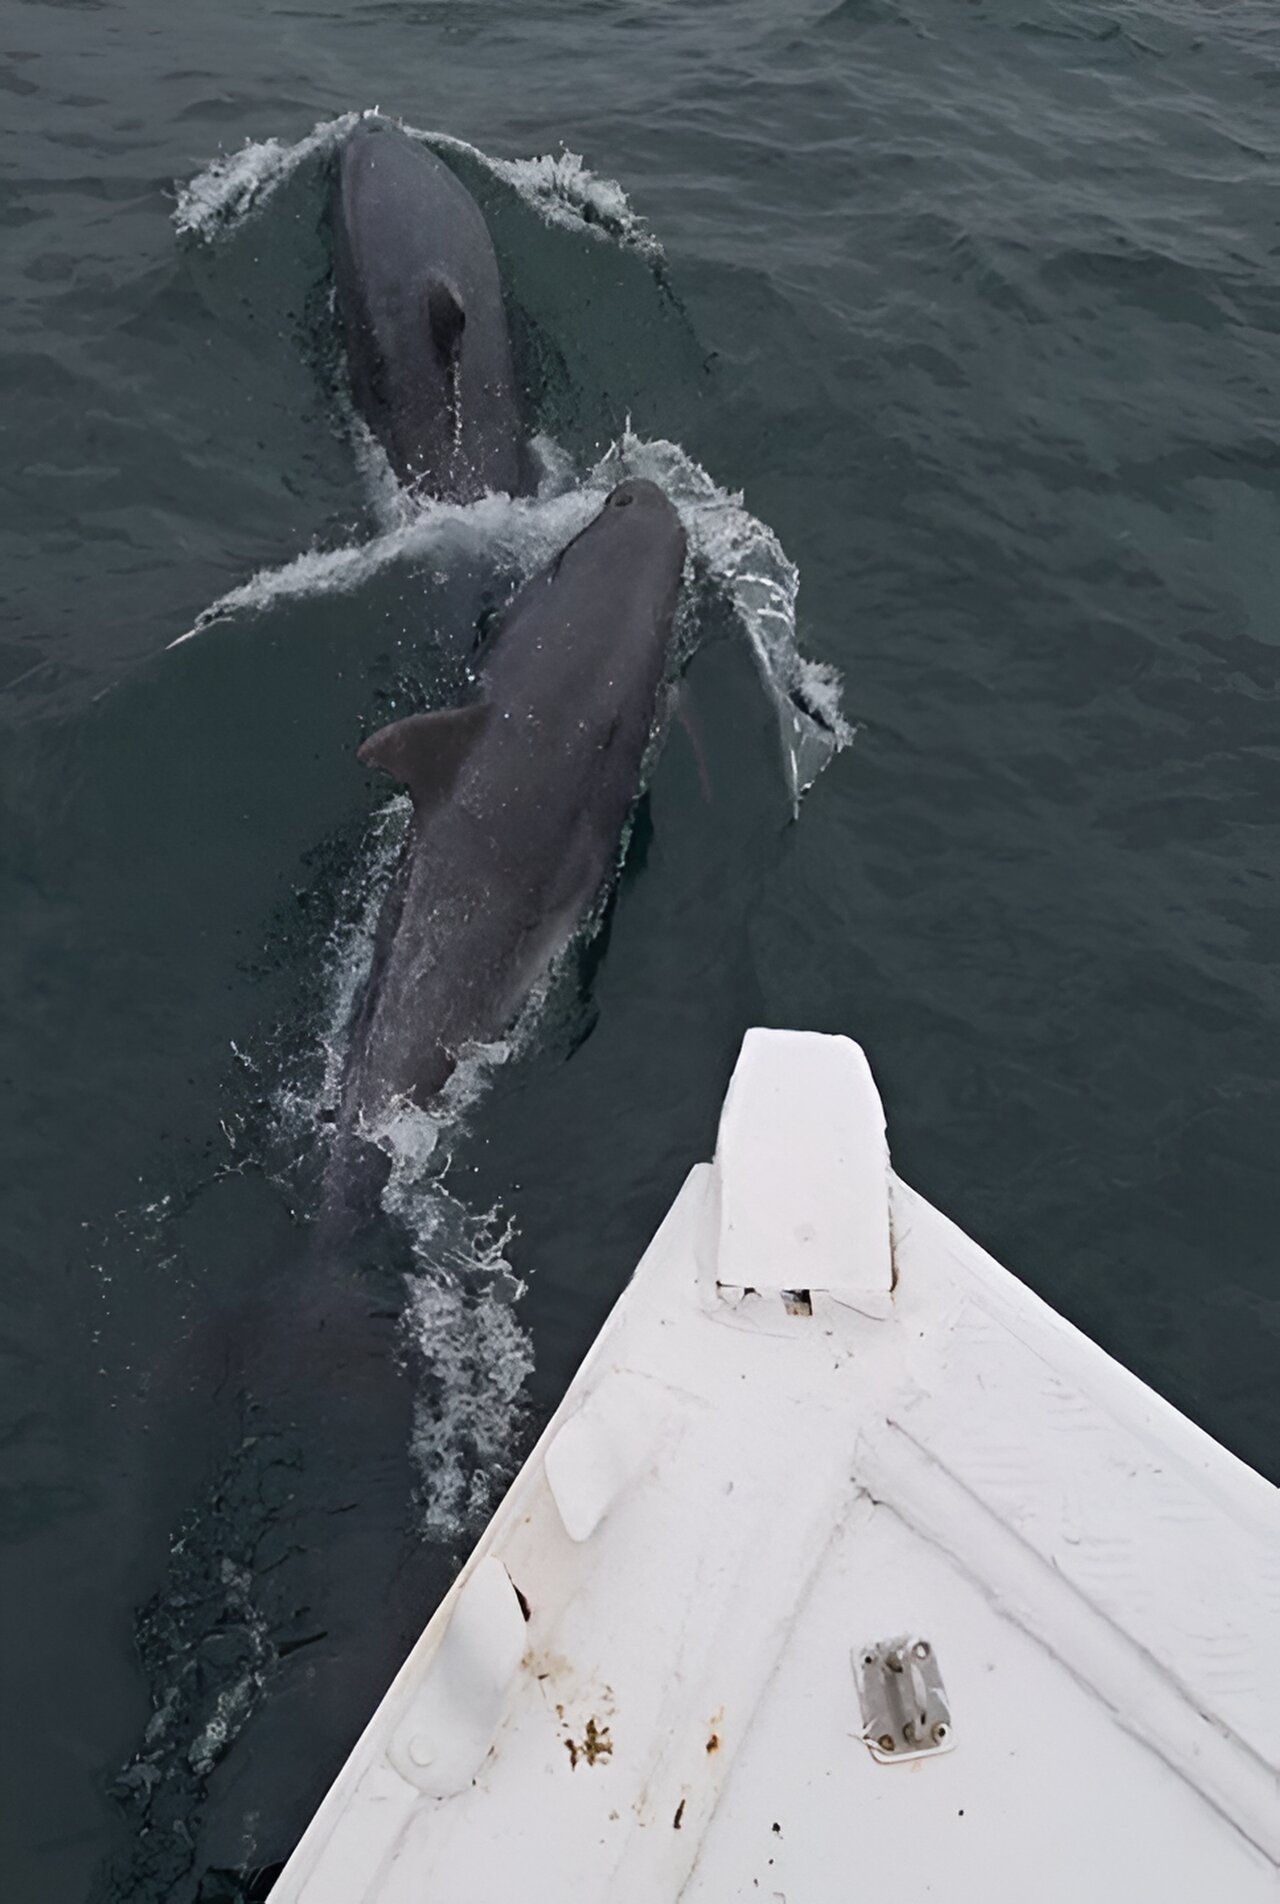 Citizen science project finds that respectful boat users are rewarded with magical dolphin encounters